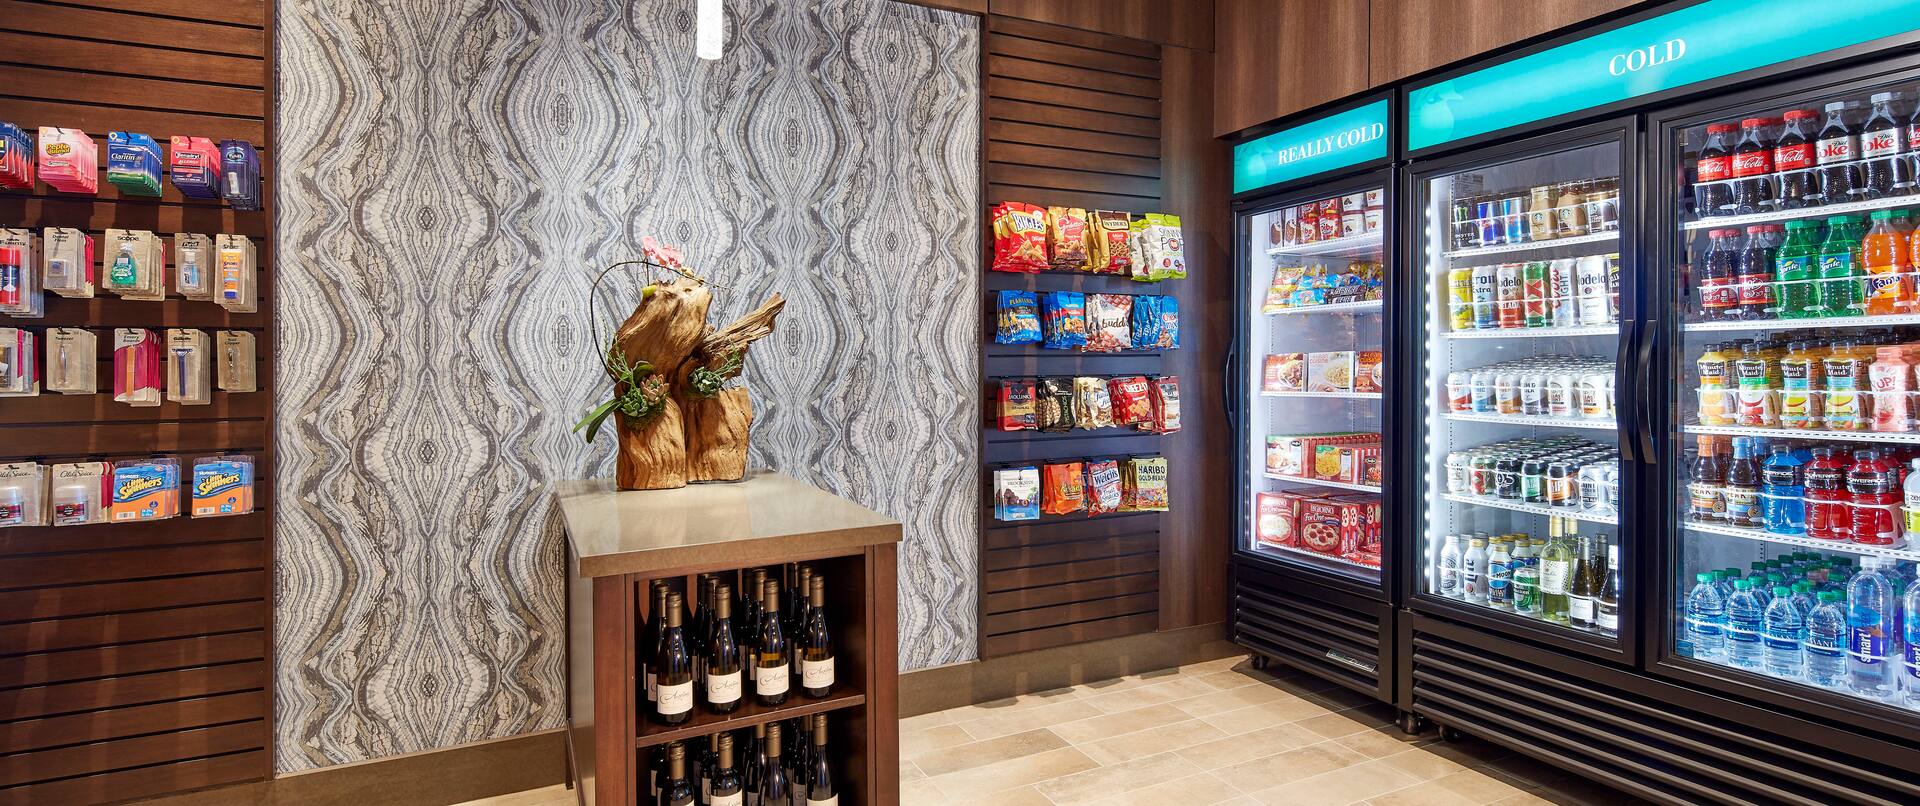 Suite Shop with Snacks, Beverages, Frozen Food, Wine, and Personal Items for Purchase